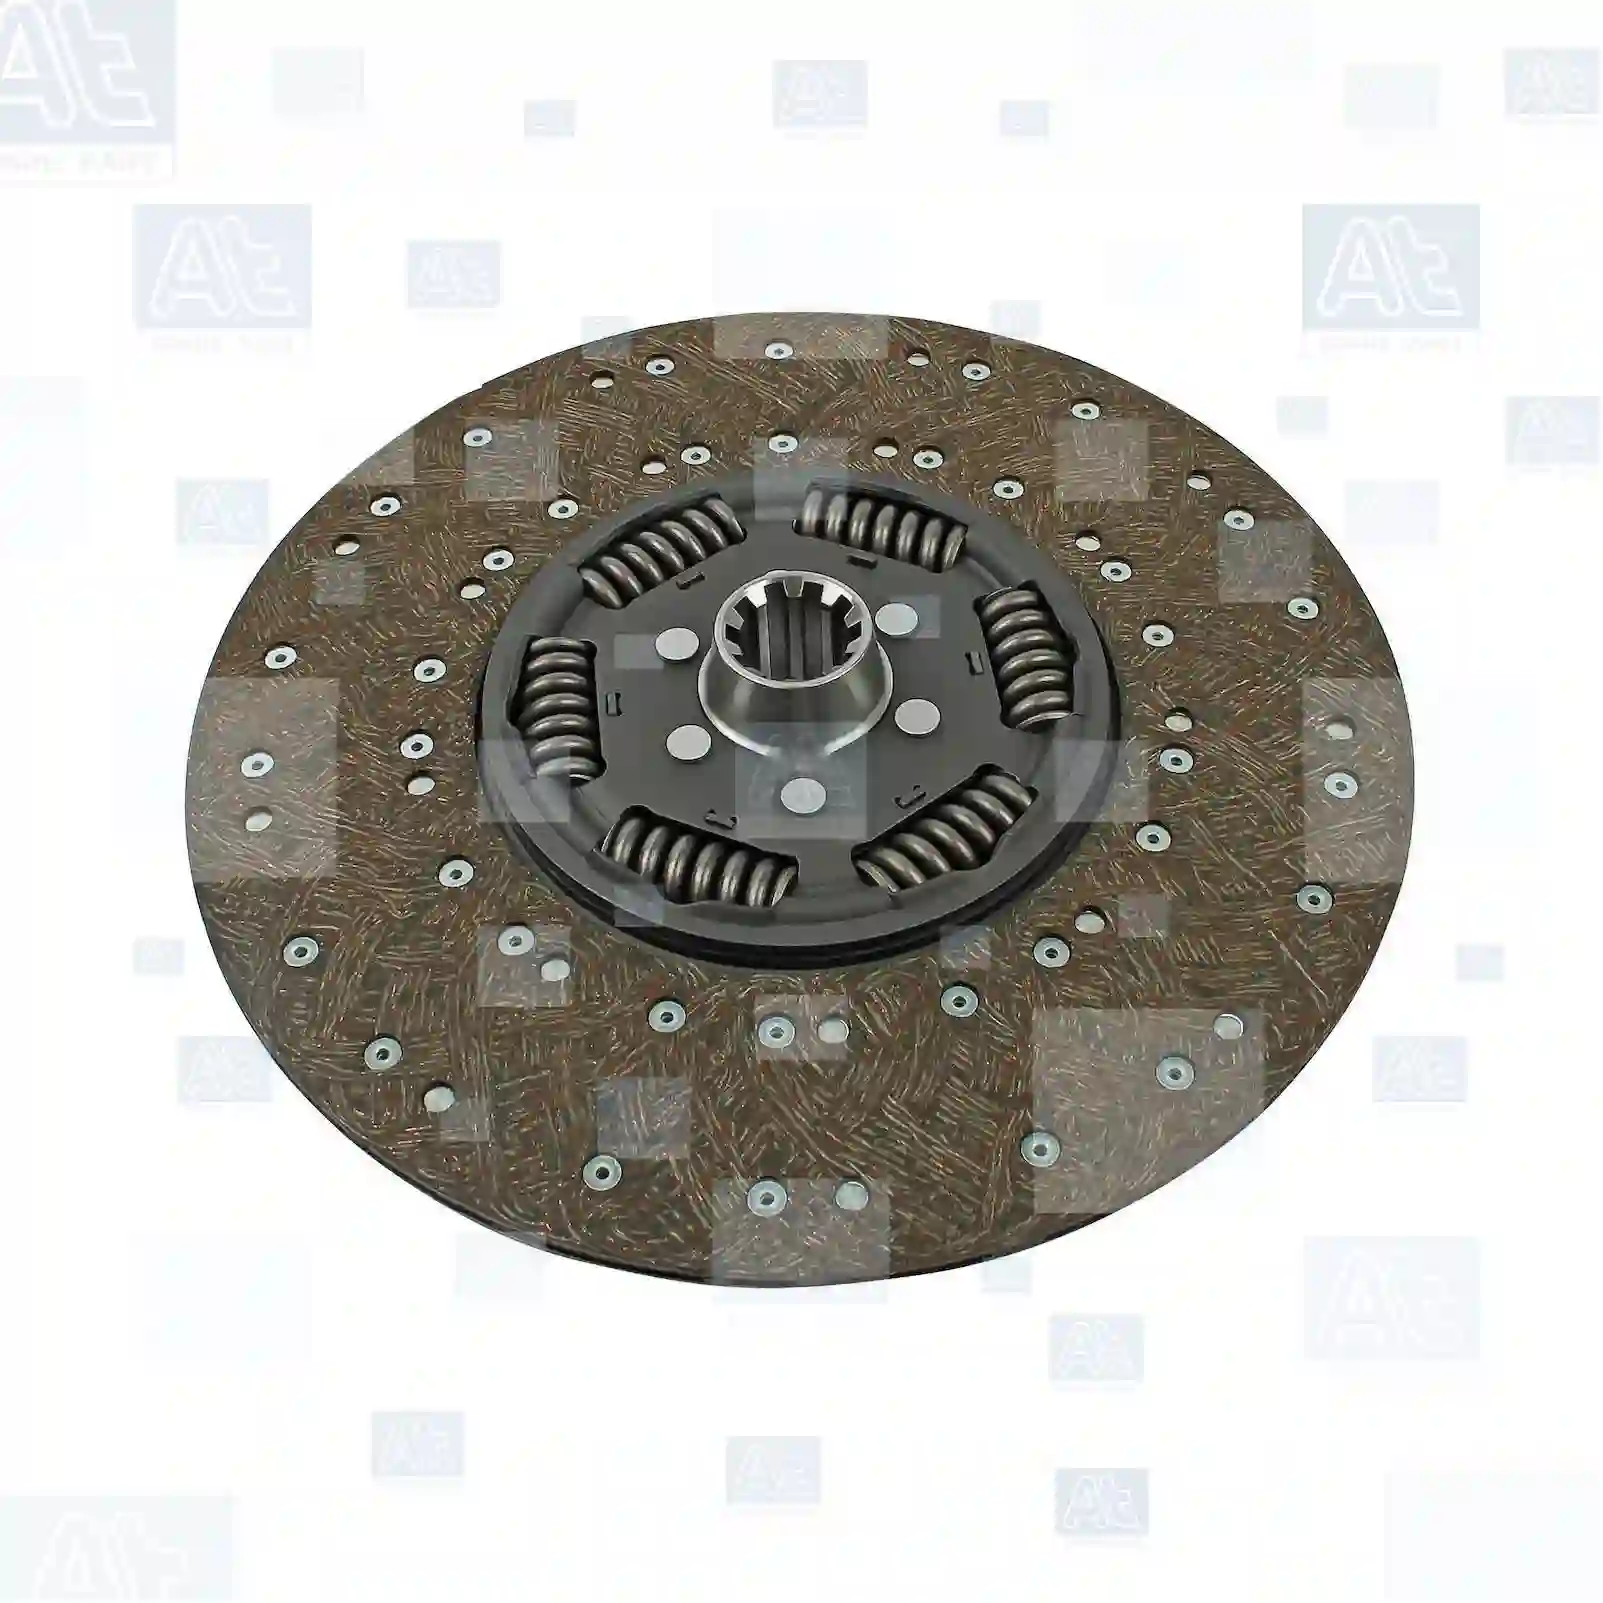 Clutch disc, at no 77721988, oem no: 00055010, 01903836, 01903845, 01903862, 01903865, 01903879, 01903881, 01903886, 01903899, 01903911, 01903924, 01904761, 01904762, 02477897, 04457823, 04459823, 04691736, 04741461, 42100567, 42100571, 42100576, 42114182, 94459823, 04459823, 04691736, 42100567, 42100571, 42100576, 01903836, 01903845, 01903862, 01903865, 01903881, 01903886, 01903911, 01903924, 01904761, 01904762, 02477897, 02991587, 04457823, 04459823, 04691736, 04741461, 04741464, 04830035, 1903862, 1903865, 2477897, 42100567, 42100571, 42100576, 42114182, 4457823, 4459823, 4691736, 4741461, 94459823, 5290559, 5292189, 632100090, 632100410 At Spare Part | Engine, Accelerator Pedal, Camshaft, Connecting Rod, Crankcase, Crankshaft, Cylinder Head, Engine Suspension Mountings, Exhaust Manifold, Exhaust Gas Recirculation, Filter Kits, Flywheel Housing, General Overhaul Kits, Engine, Intake Manifold, Oil Cleaner, Oil Cooler, Oil Filter, Oil Pump, Oil Sump, Piston & Liner, Sensor & Switch, Timing Case, Turbocharger, Cooling System, Belt Tensioner, Coolant Filter, Coolant Pipe, Corrosion Prevention Agent, Drive, Expansion Tank, Fan, Intercooler, Monitors & Gauges, Radiator, Thermostat, V-Belt / Timing belt, Water Pump, Fuel System, Electronical Injector Unit, Feed Pump, Fuel Filter, cpl., Fuel Gauge Sender,  Fuel Line, Fuel Pump, Fuel Tank, Injection Line Kit, Injection Pump, Exhaust System, Clutch & Pedal, Gearbox, Propeller Shaft, Axles, Brake System, Hubs & Wheels, Suspension, Leaf Spring, Universal Parts / Accessories, Steering, Electrical System, Cabin Clutch disc, at no 77721988, oem no: 00055010, 01903836, 01903845, 01903862, 01903865, 01903879, 01903881, 01903886, 01903899, 01903911, 01903924, 01904761, 01904762, 02477897, 04457823, 04459823, 04691736, 04741461, 42100567, 42100571, 42100576, 42114182, 94459823, 04459823, 04691736, 42100567, 42100571, 42100576, 01903836, 01903845, 01903862, 01903865, 01903881, 01903886, 01903911, 01903924, 01904761, 01904762, 02477897, 02991587, 04457823, 04459823, 04691736, 04741461, 04741464, 04830035, 1903862, 1903865, 2477897, 42100567, 42100571, 42100576, 42114182, 4457823, 4459823, 4691736, 4741461, 94459823, 5290559, 5292189, 632100090, 632100410 At Spare Part | Engine, Accelerator Pedal, Camshaft, Connecting Rod, Crankcase, Crankshaft, Cylinder Head, Engine Suspension Mountings, Exhaust Manifold, Exhaust Gas Recirculation, Filter Kits, Flywheel Housing, General Overhaul Kits, Engine, Intake Manifold, Oil Cleaner, Oil Cooler, Oil Filter, Oil Pump, Oil Sump, Piston & Liner, Sensor & Switch, Timing Case, Turbocharger, Cooling System, Belt Tensioner, Coolant Filter, Coolant Pipe, Corrosion Prevention Agent, Drive, Expansion Tank, Fan, Intercooler, Monitors & Gauges, Radiator, Thermostat, V-Belt / Timing belt, Water Pump, Fuel System, Electronical Injector Unit, Feed Pump, Fuel Filter, cpl., Fuel Gauge Sender,  Fuel Line, Fuel Pump, Fuel Tank, Injection Line Kit, Injection Pump, Exhaust System, Clutch & Pedal, Gearbox, Propeller Shaft, Axles, Brake System, Hubs & Wheels, Suspension, Leaf Spring, Universal Parts / Accessories, Steering, Electrical System, Cabin